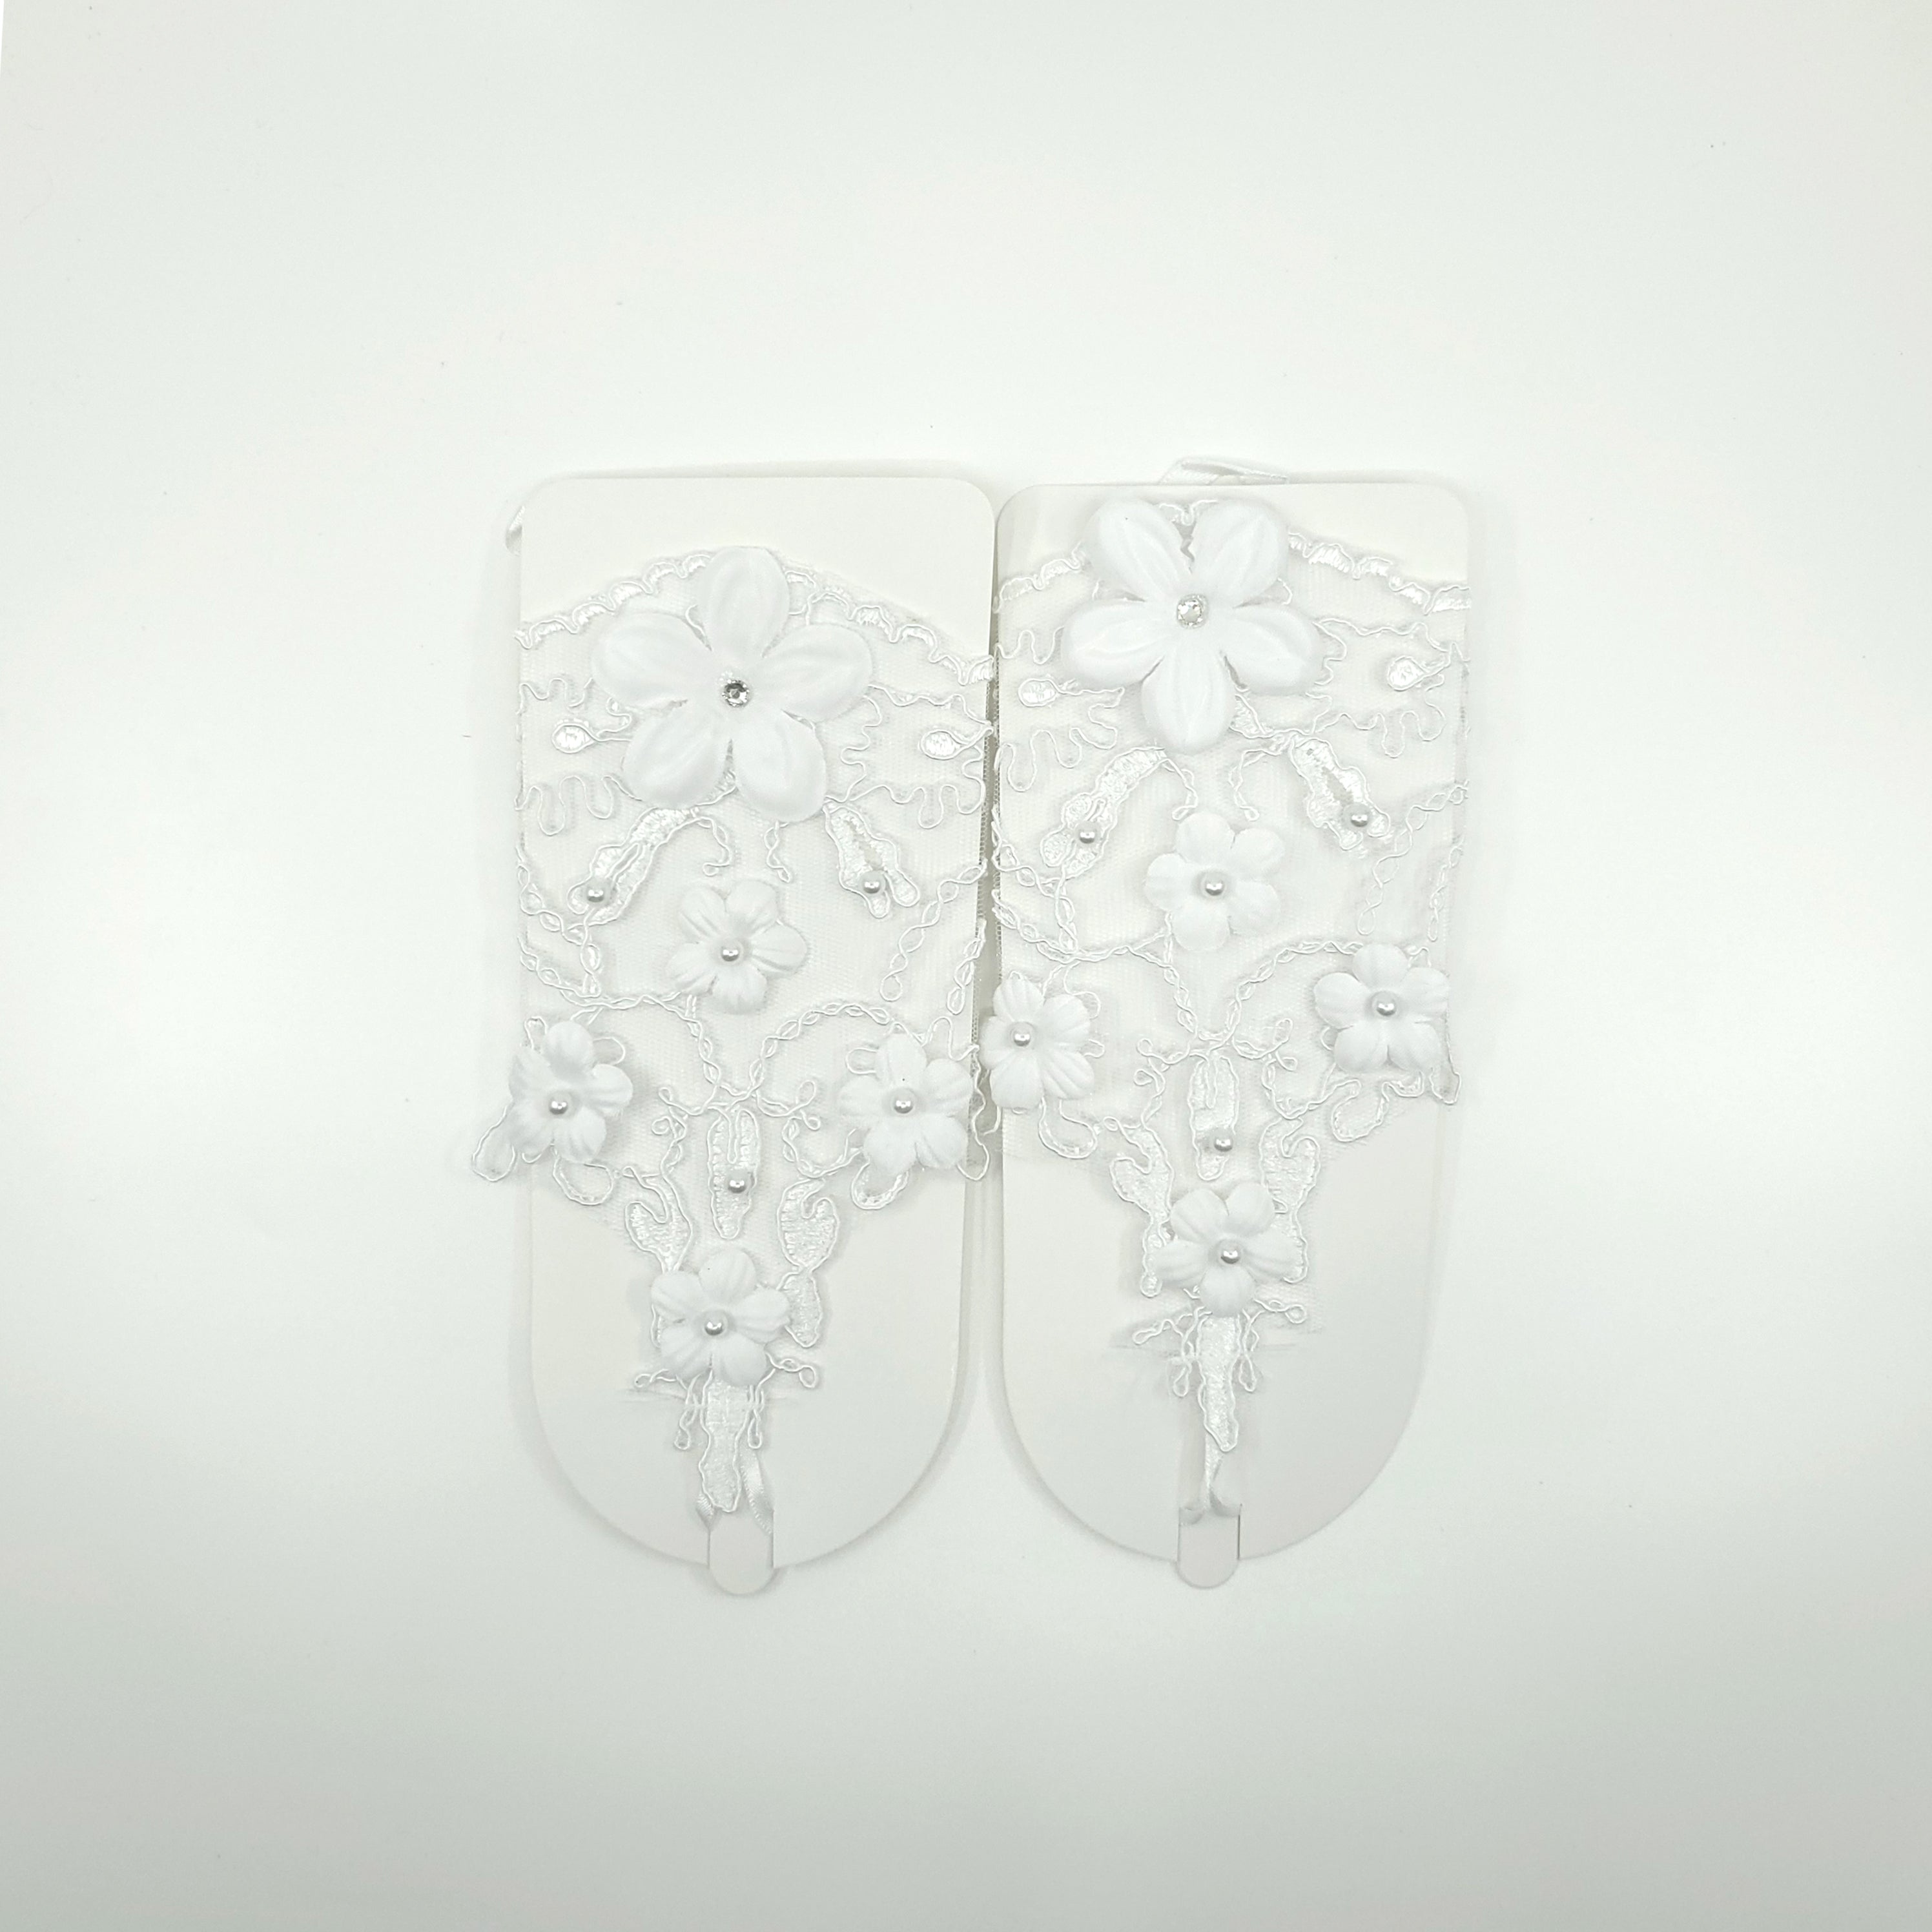 WEDDING GLOVE LACE UP FINGERLESS FLORAL 216 (12PC)